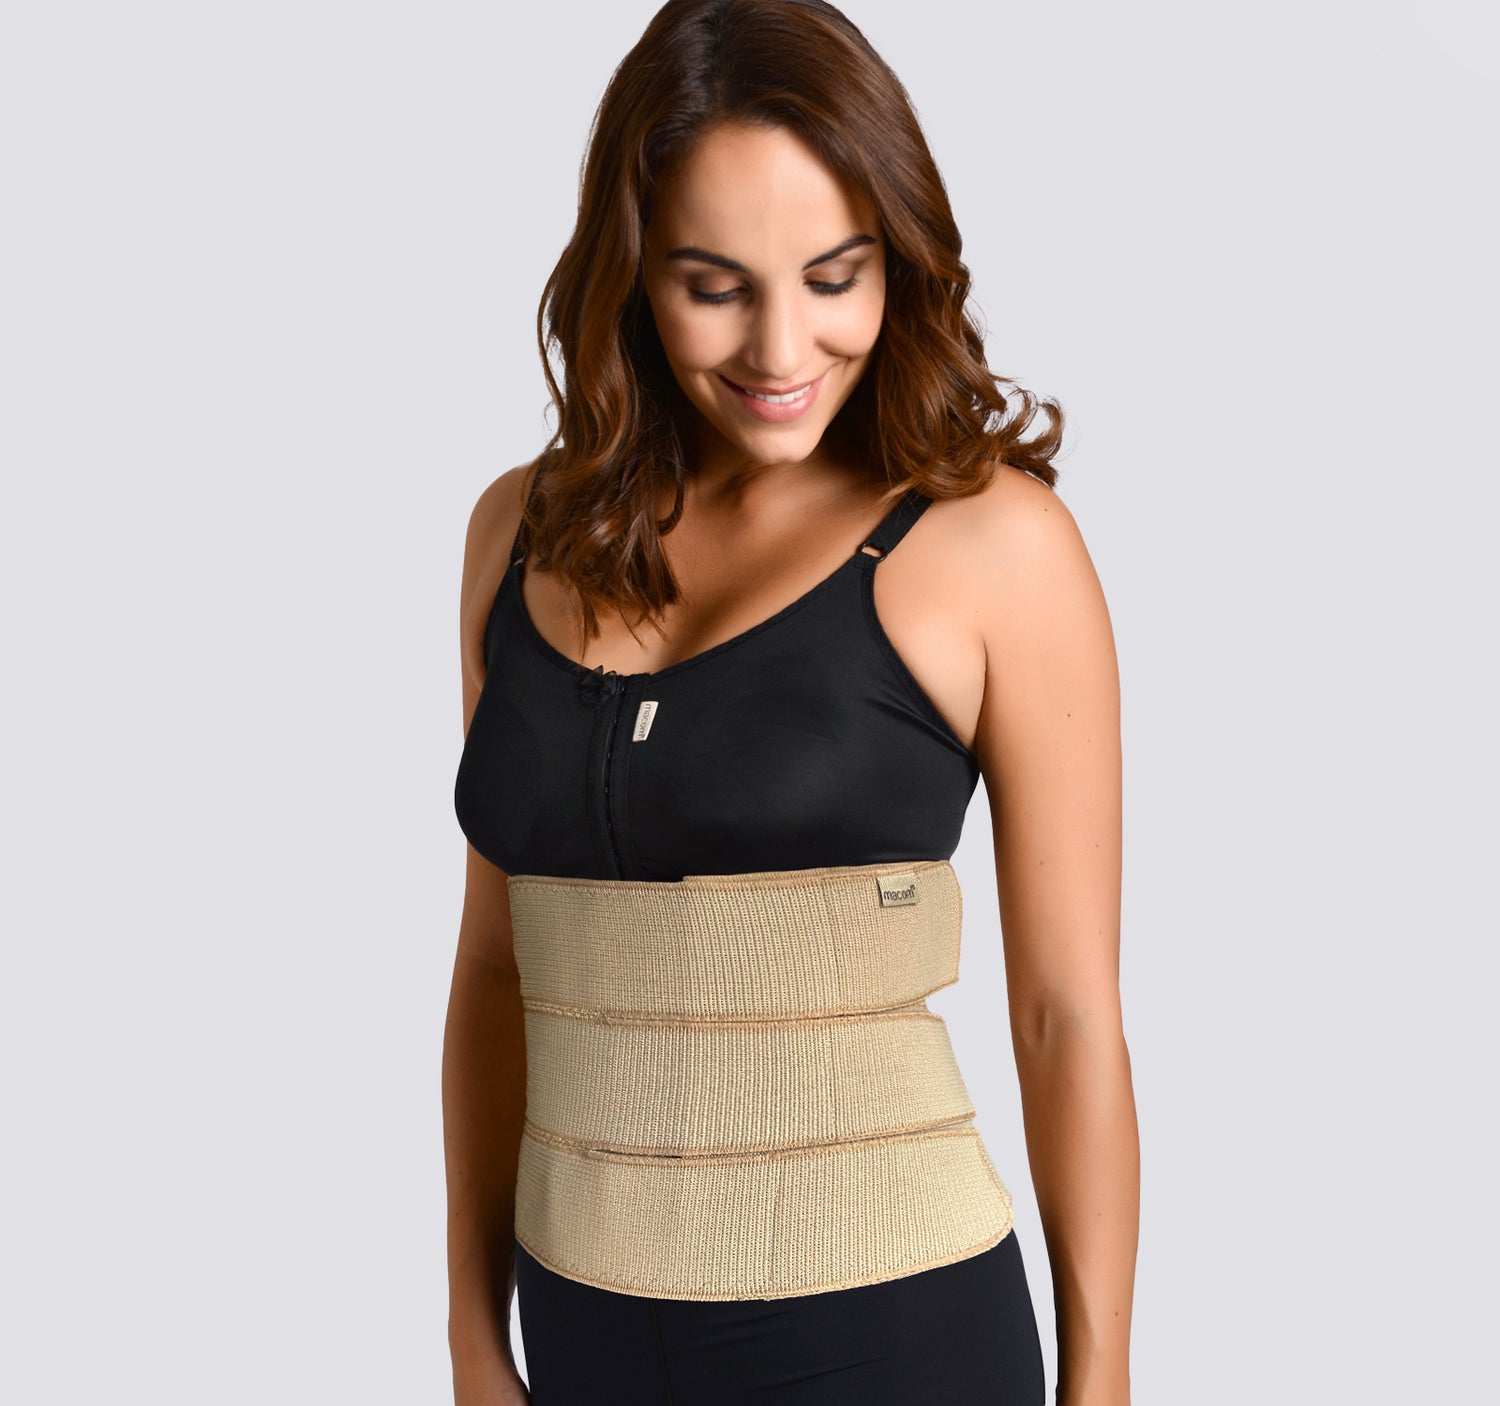 Compression girdle, After surgery